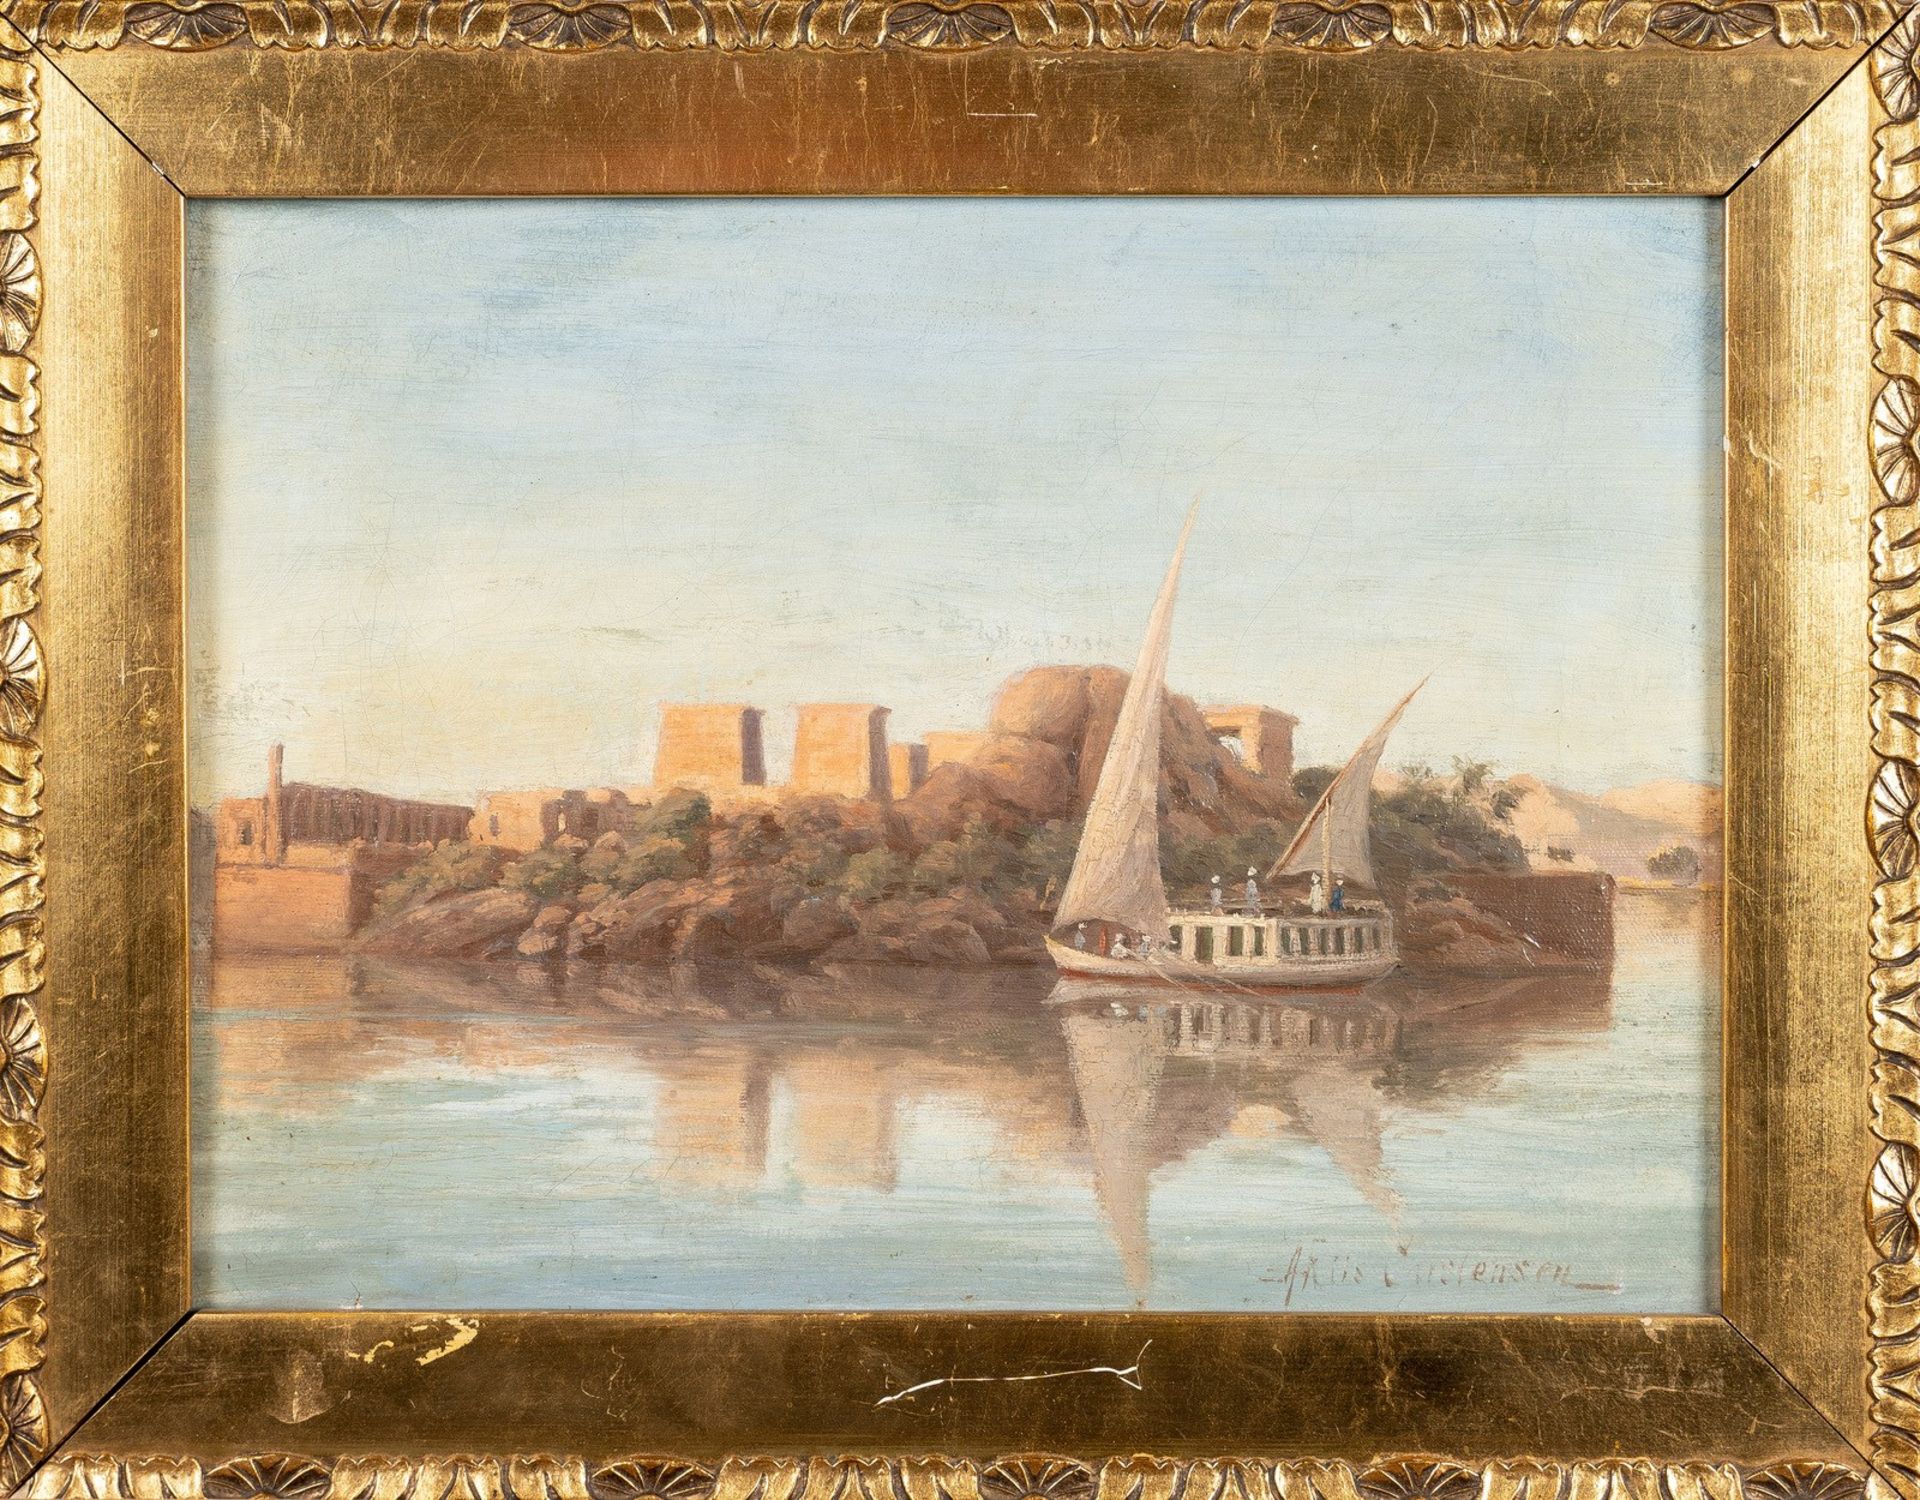 Arte Islamica View from the Nile Sigend Carstensen (?)Oil on canvas 19th century .